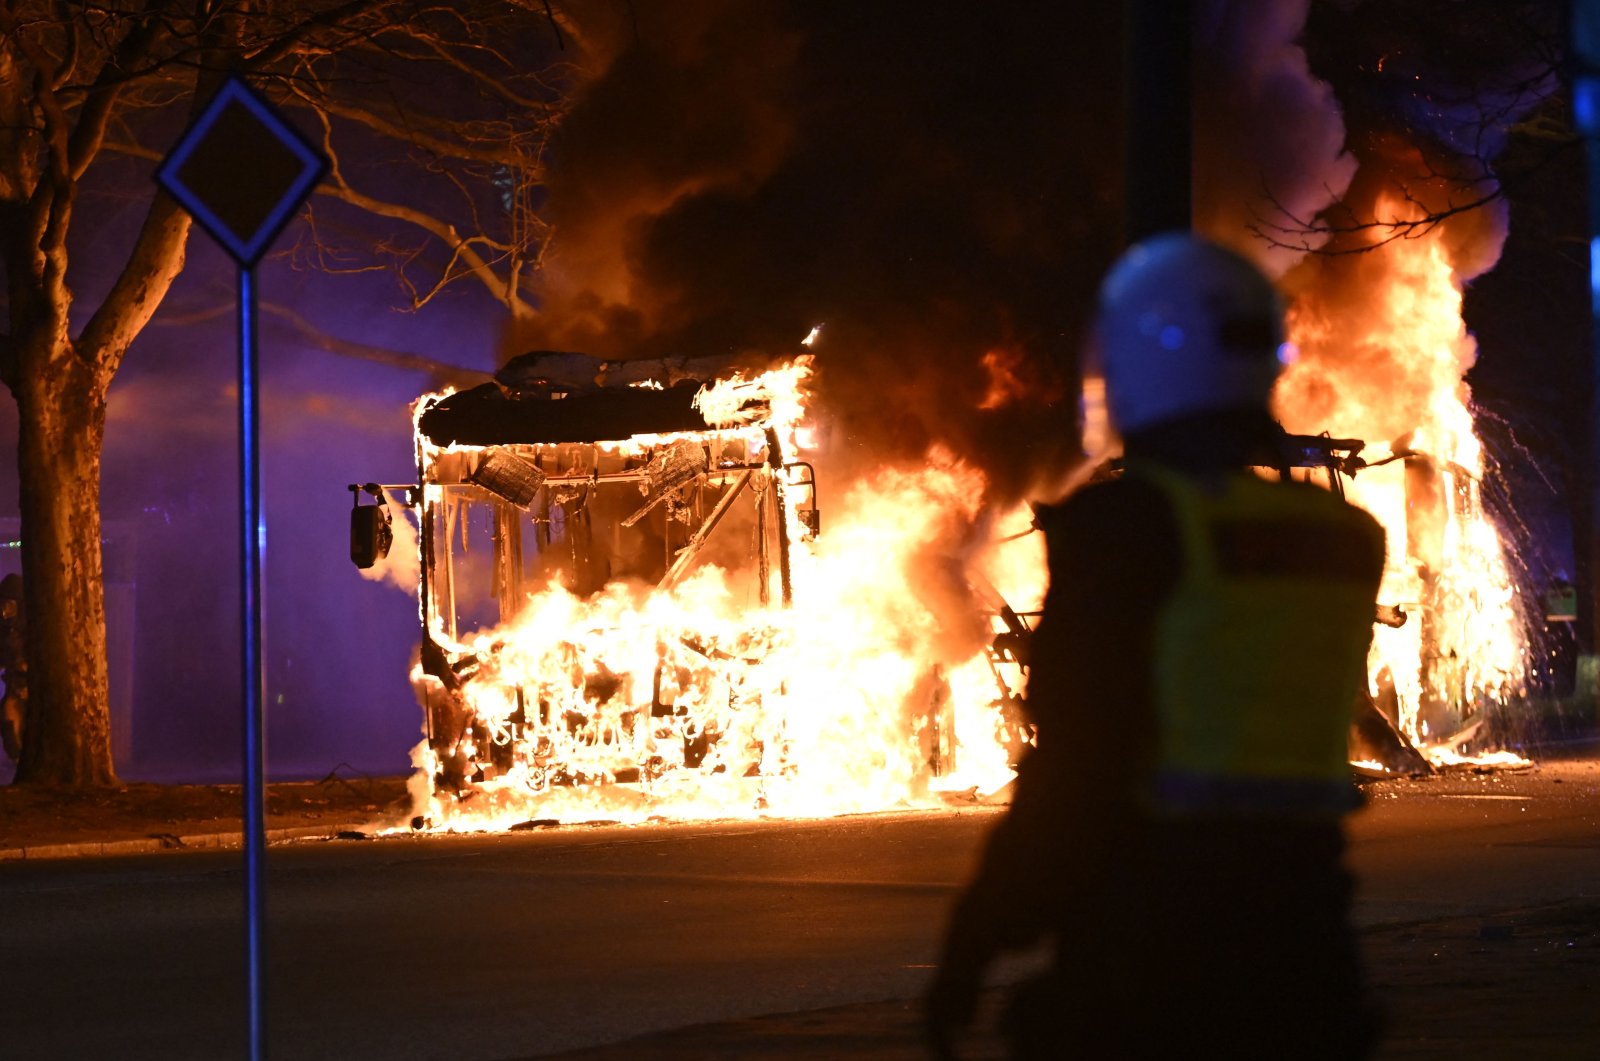 An anti-riot police officer stands next to a city bus burning in Malmo, Sweden, April 16, 2022. (AFP Photo)